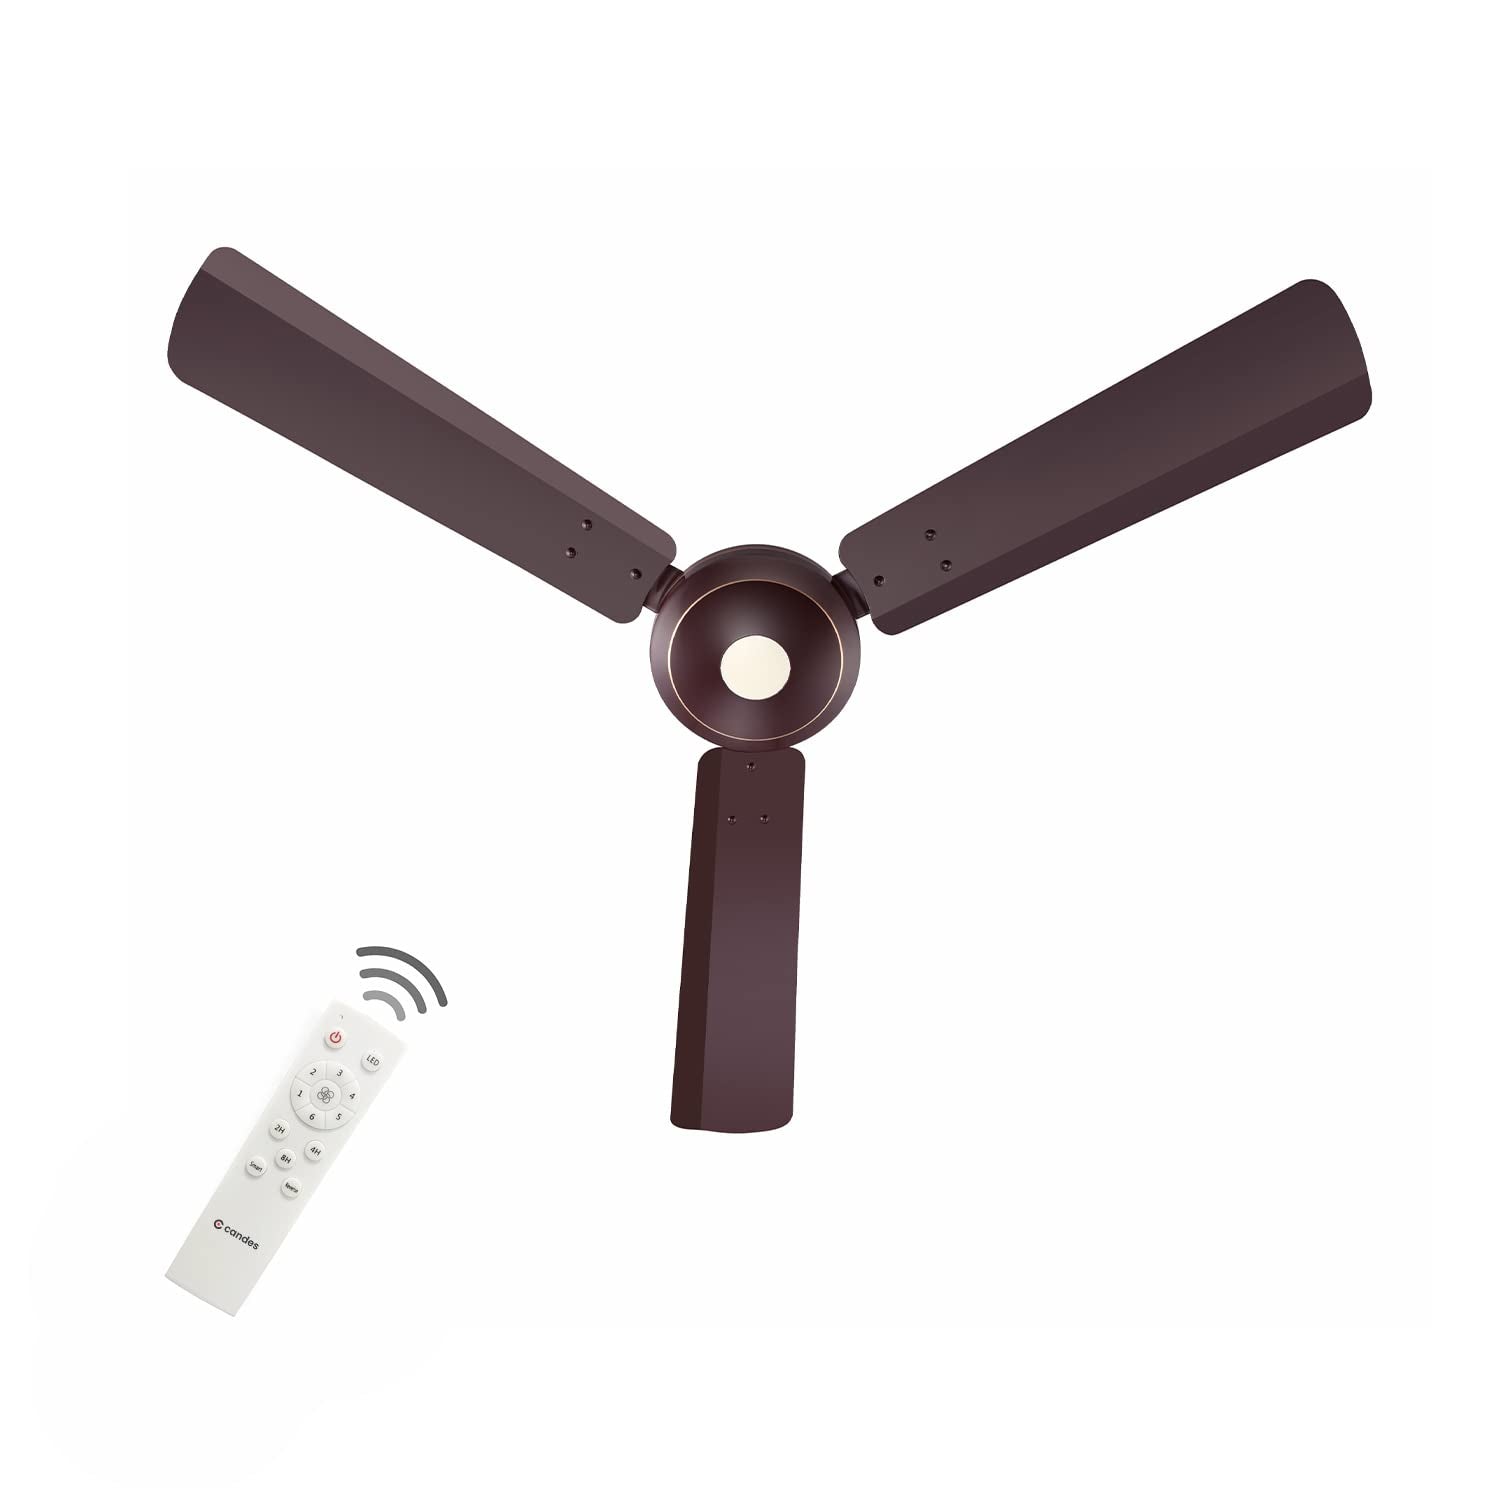 Candes Acura BLDC 5 star Energy Saving High Speed Ceiling Fan with Remote, 1200 mm (Acura-Ivory)